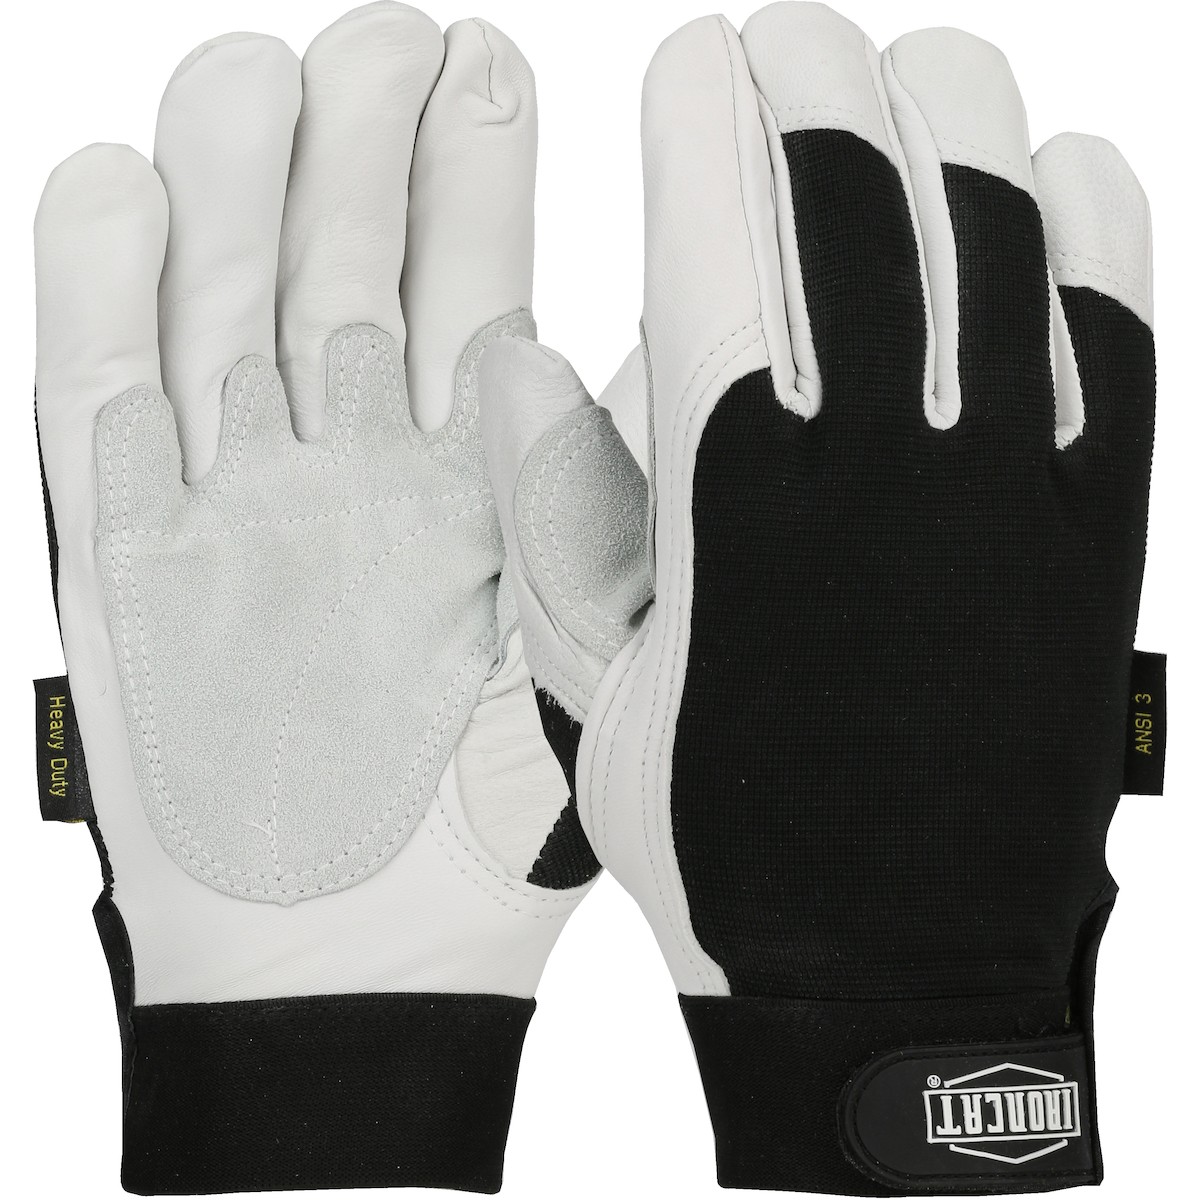 Ironcat® Top Grain Goatskin Leather Palm Glove with Kevlar® Cut Lining and Spandex Back  (#86552)